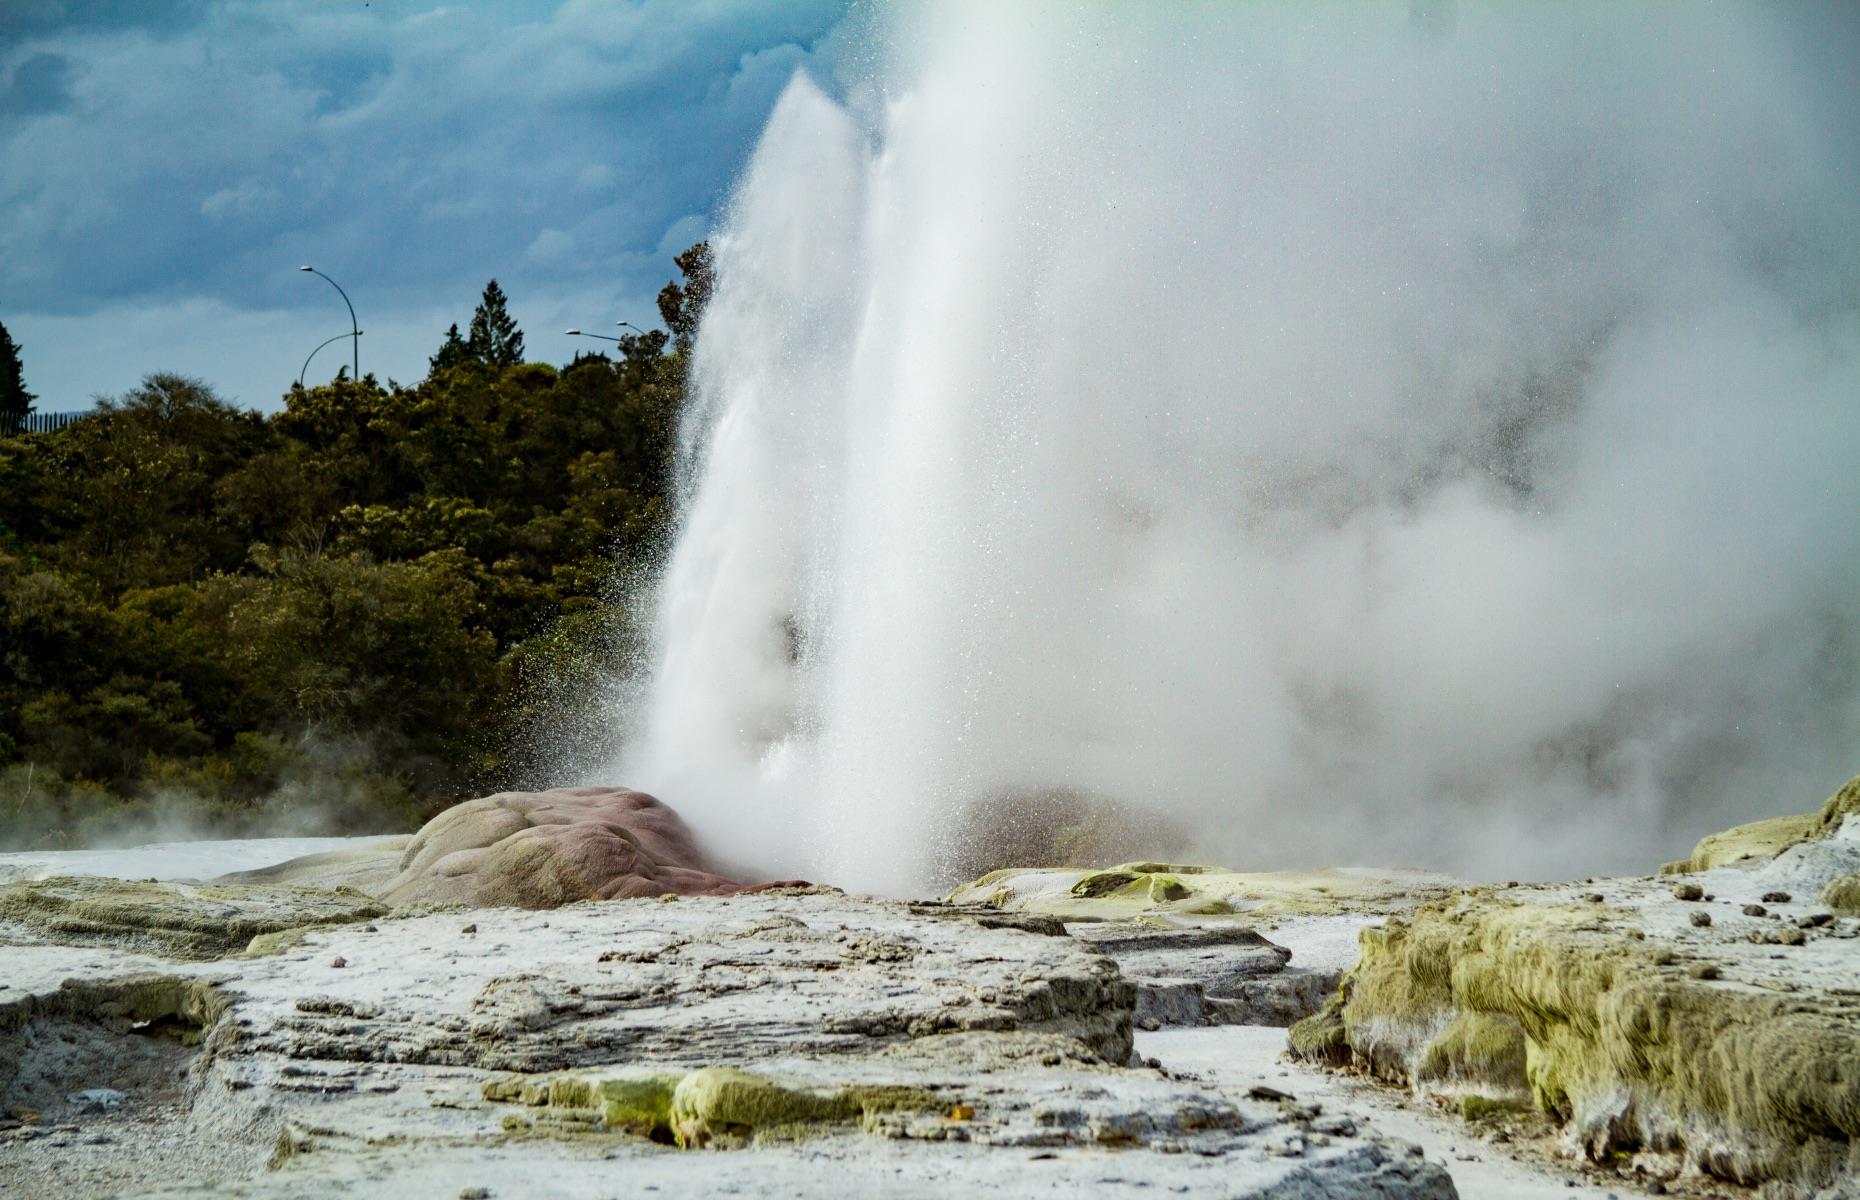 <p>The Rotorua area is jam-packed with geologic marvels, but Pohutu Geyser towers above the rest – suddenly erupting boiling water 98 feet into the air at least once every hour to the delight of onlookers. The largest active geyser in the southern hemisphere, Pohutu is part of Te Puia’s Te Whakarewarewa Geothermal Valley, full of bubbling pools and coursing elemental energy. Look out for the nearby Prince of Wales Feathers geyser, which always shoots water just before its bigger neighbor erupts.</p>